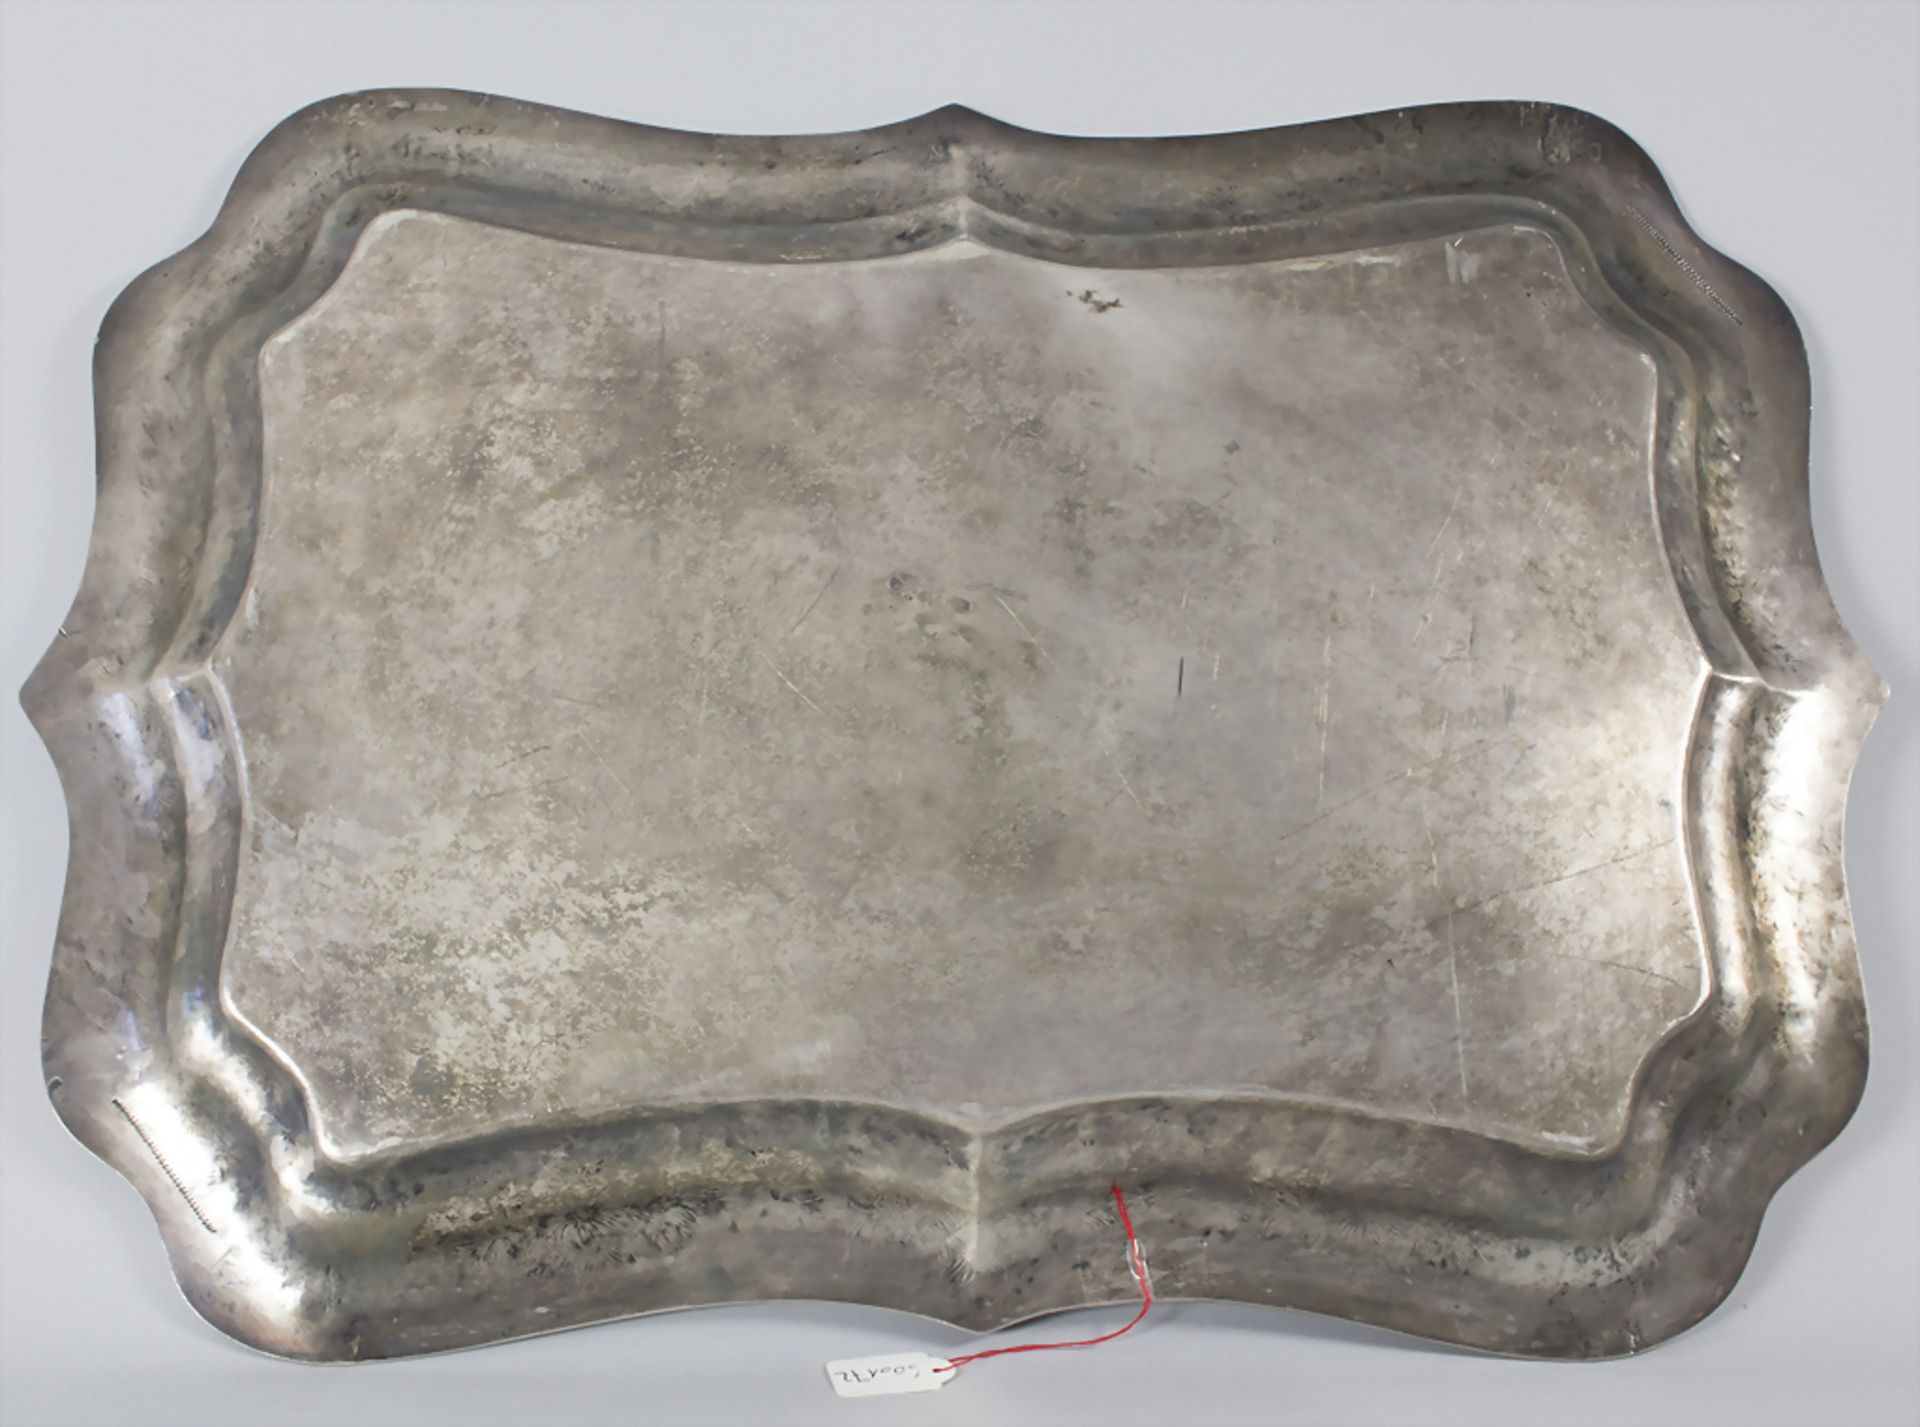 Prunk-Tablett / A large silver tray, Galtes, Barcelona, 19. Jh. - Image 6 of 9